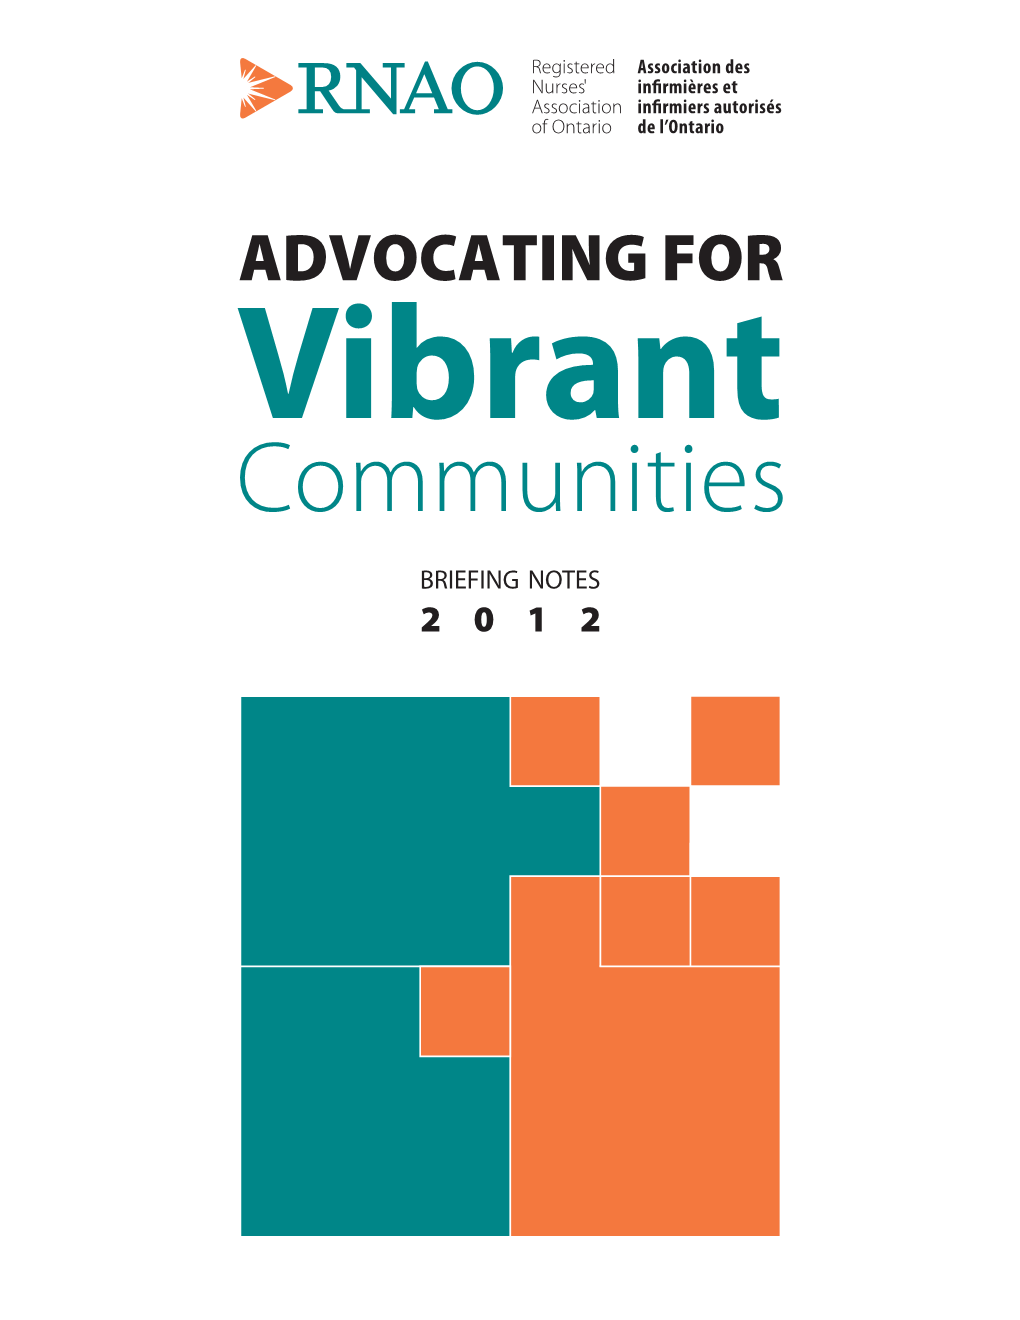 Advocating for Vibrant Communities